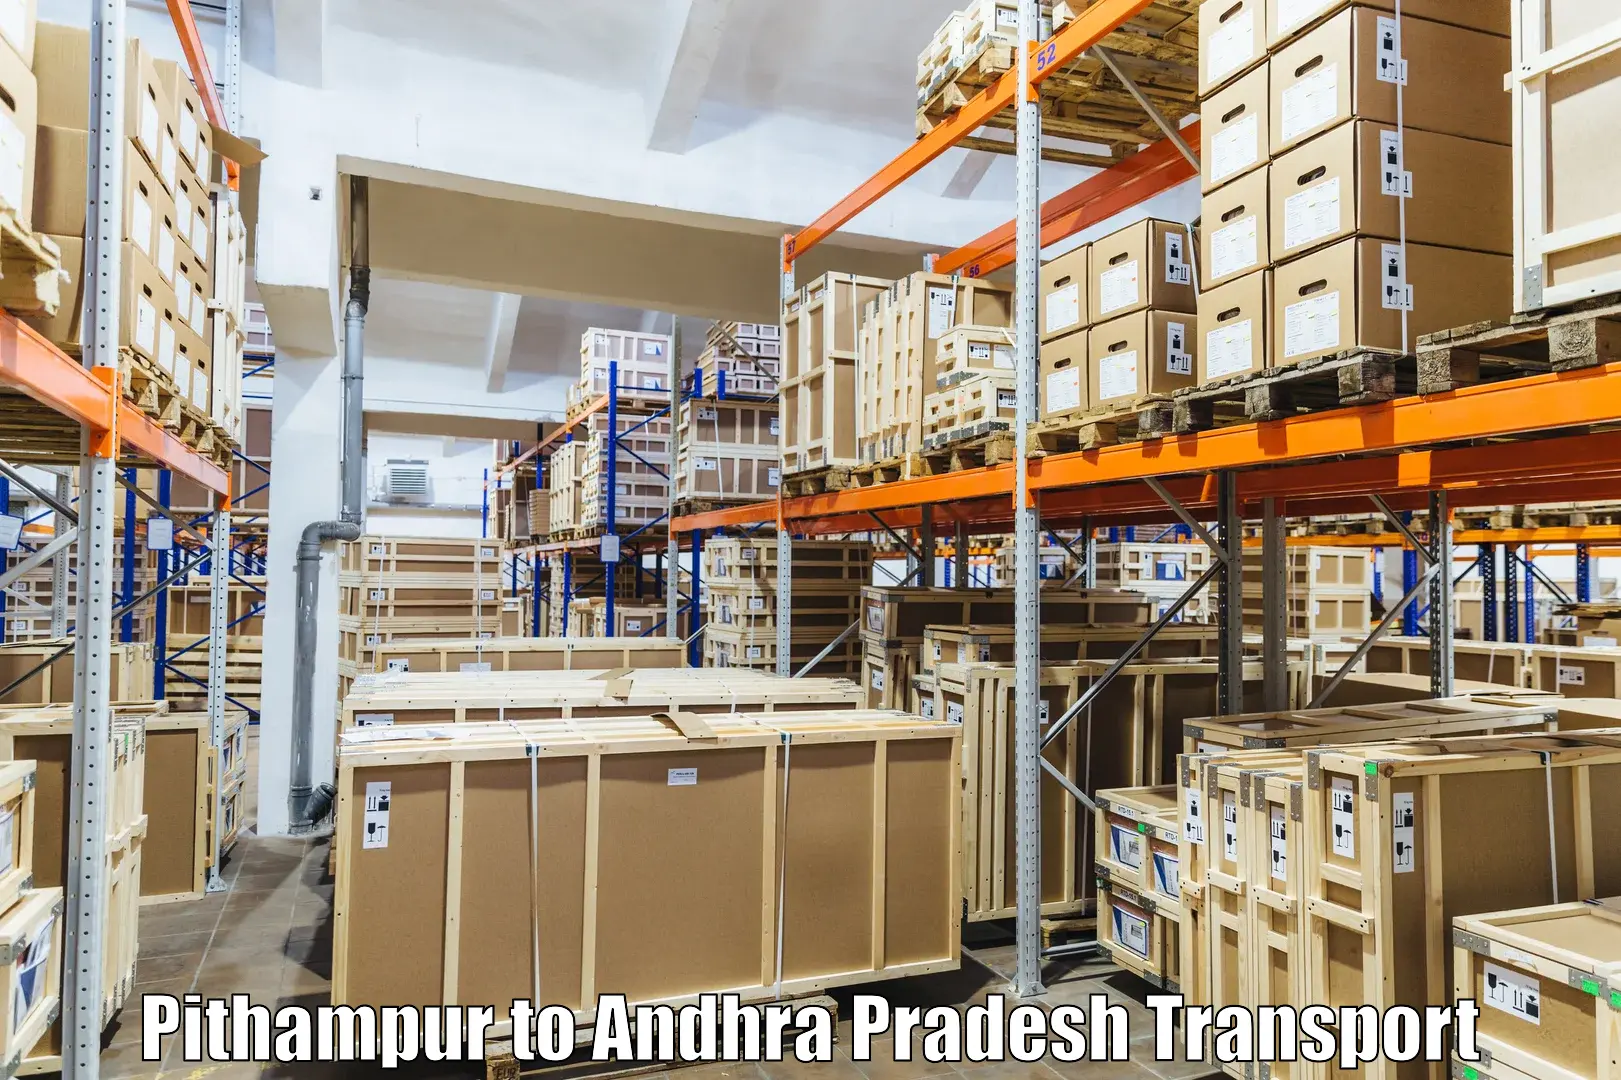 Daily transport service in Pithampur to Andhra Pradesh